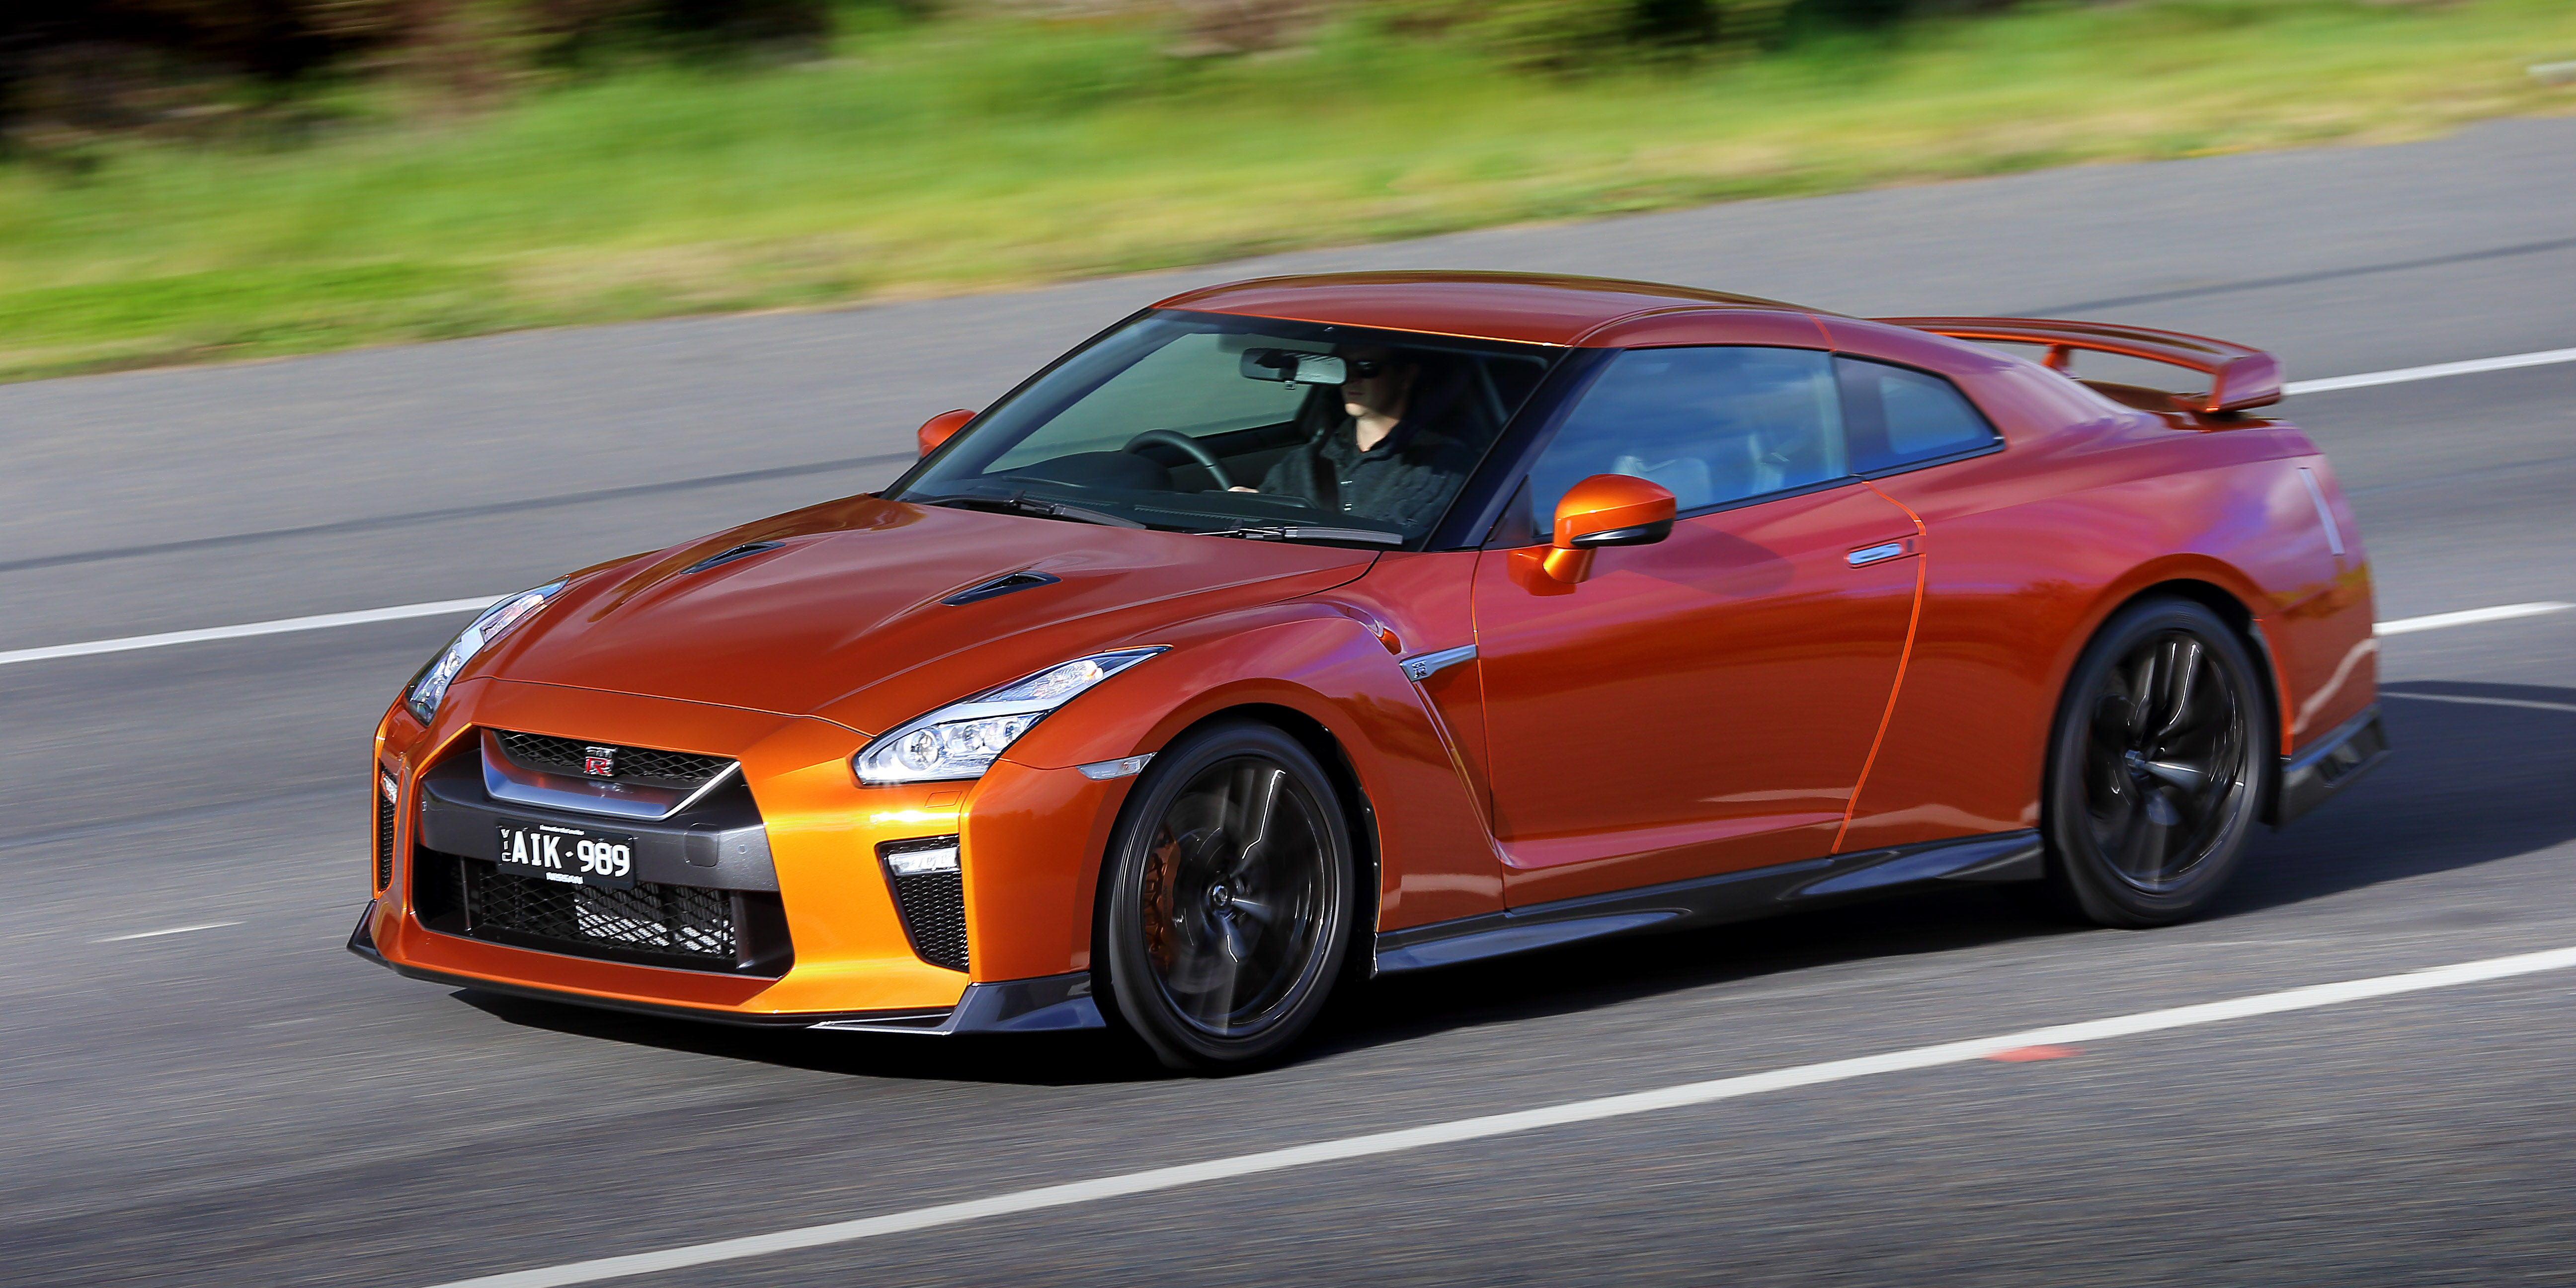 Nissan GT-R exterior specifications